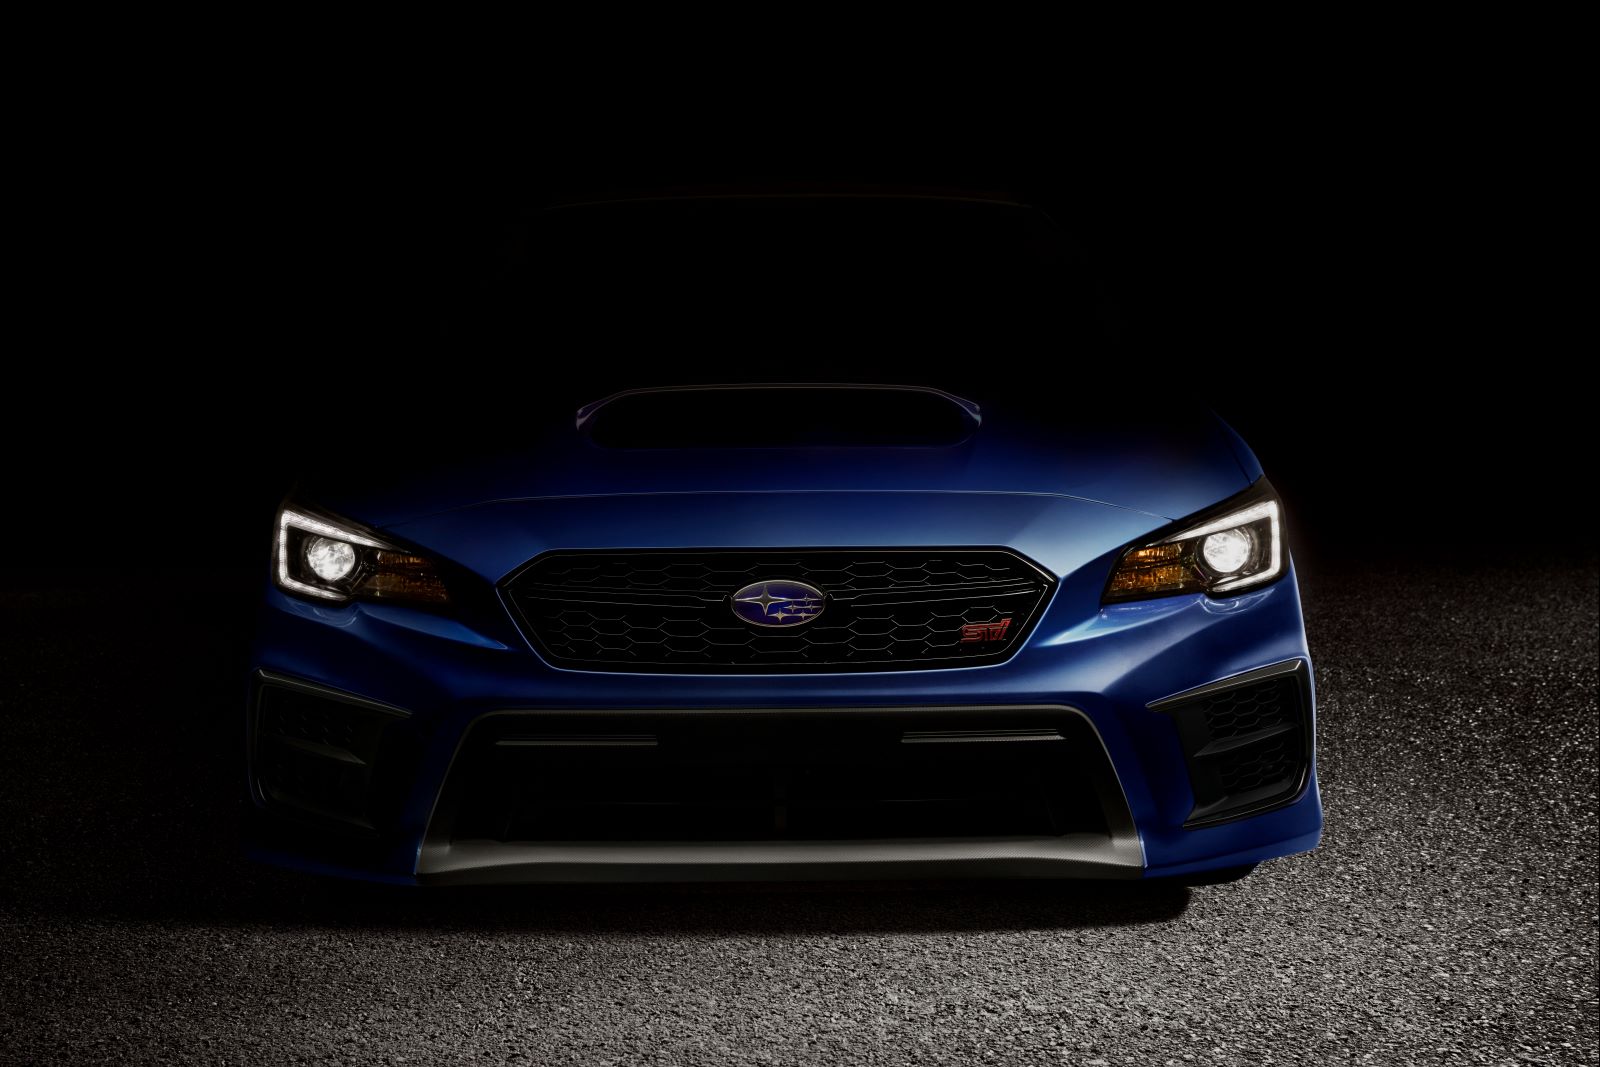 Dark front view of a 2020 Subaru WRX STI in blue. Only the front end and headlights of the car are visible